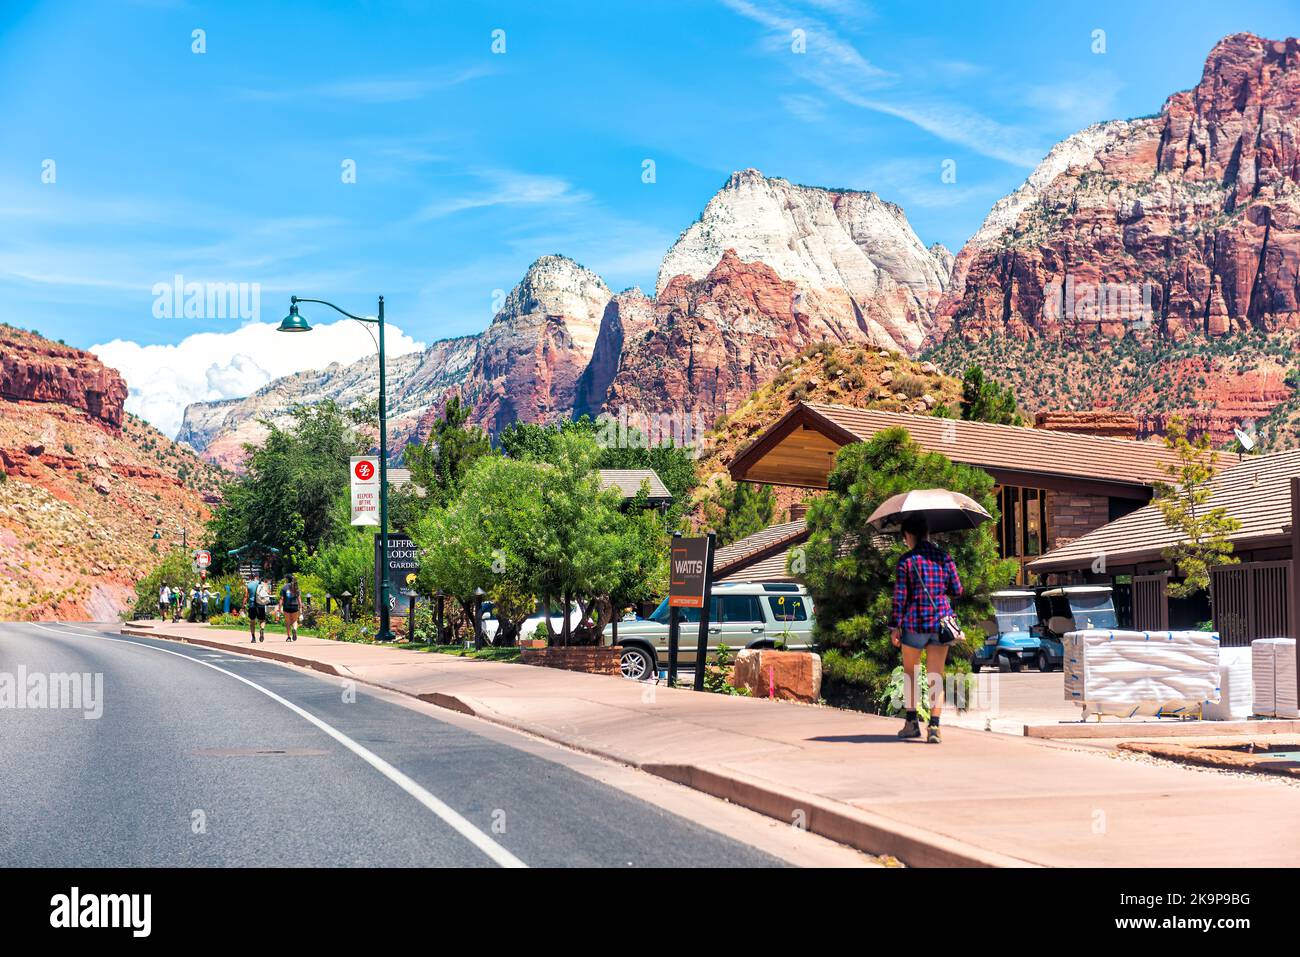 Springdale, USA - August 5, 2019: Mountain canyon town city by Zion national park with people walking on main boulevard street sidewalk road in summer Stock Photo